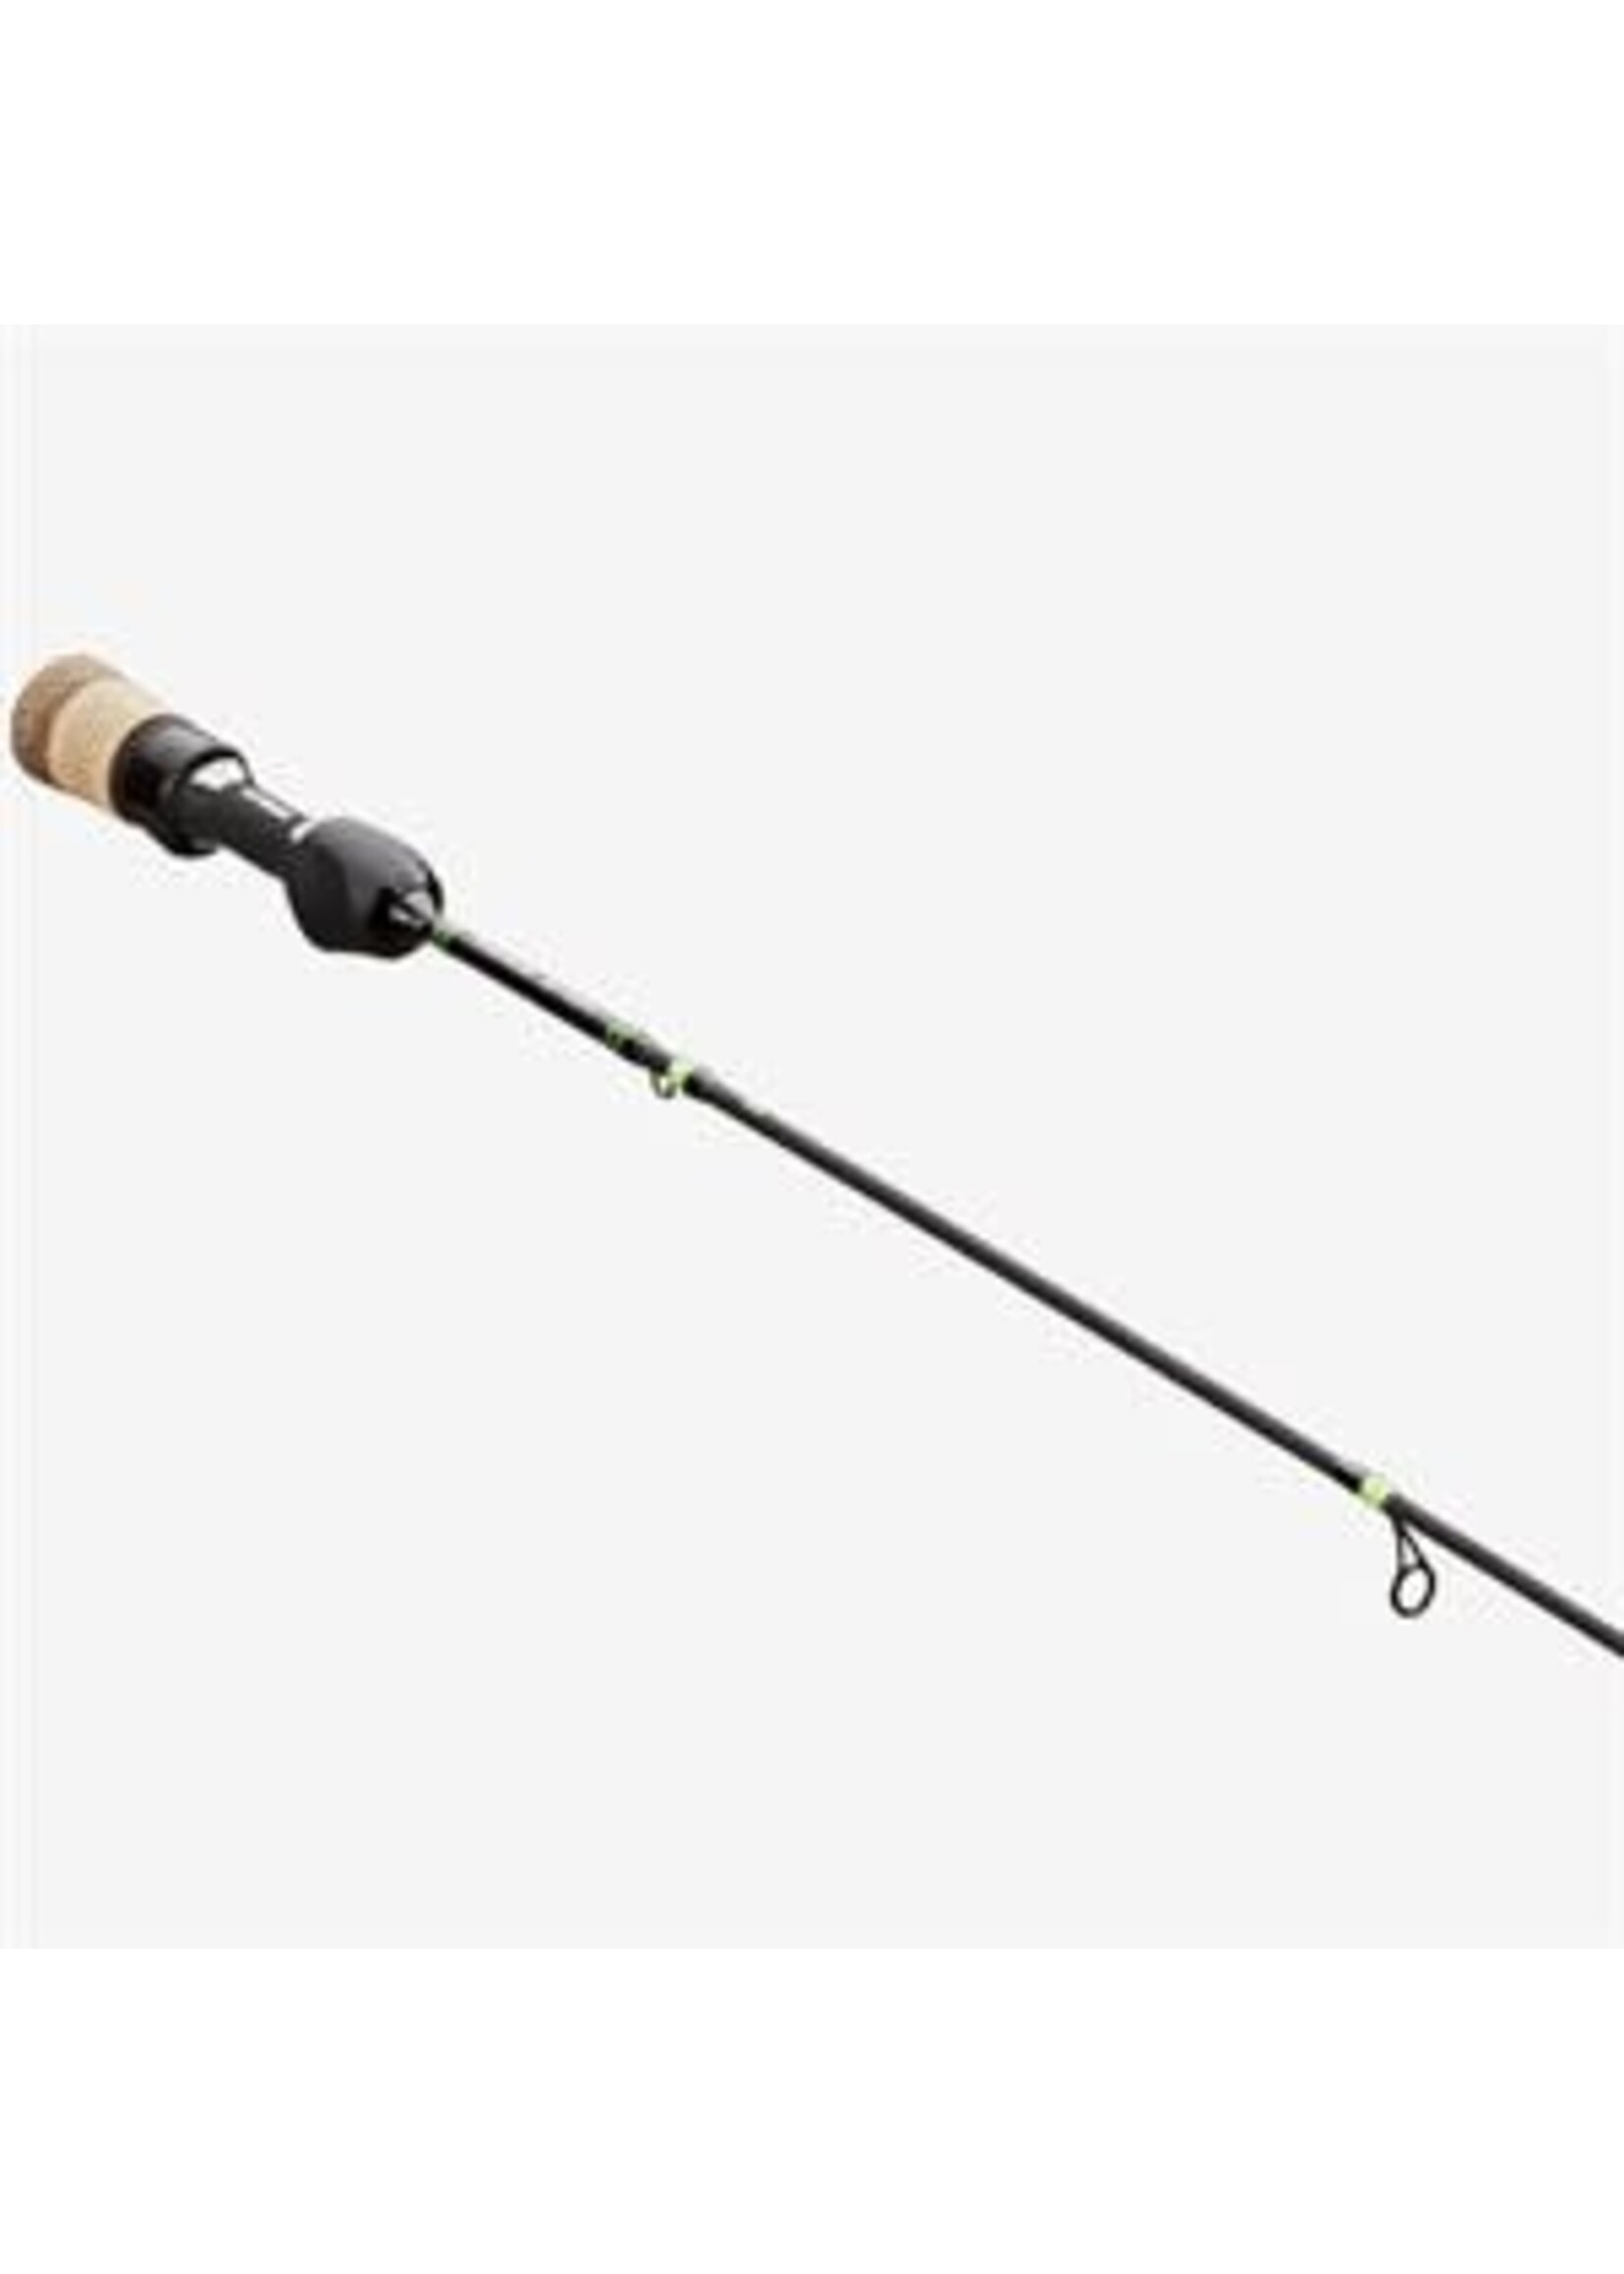 13 Fishing Tickle Stick Ice Rod (NEW) - Tackle Shack